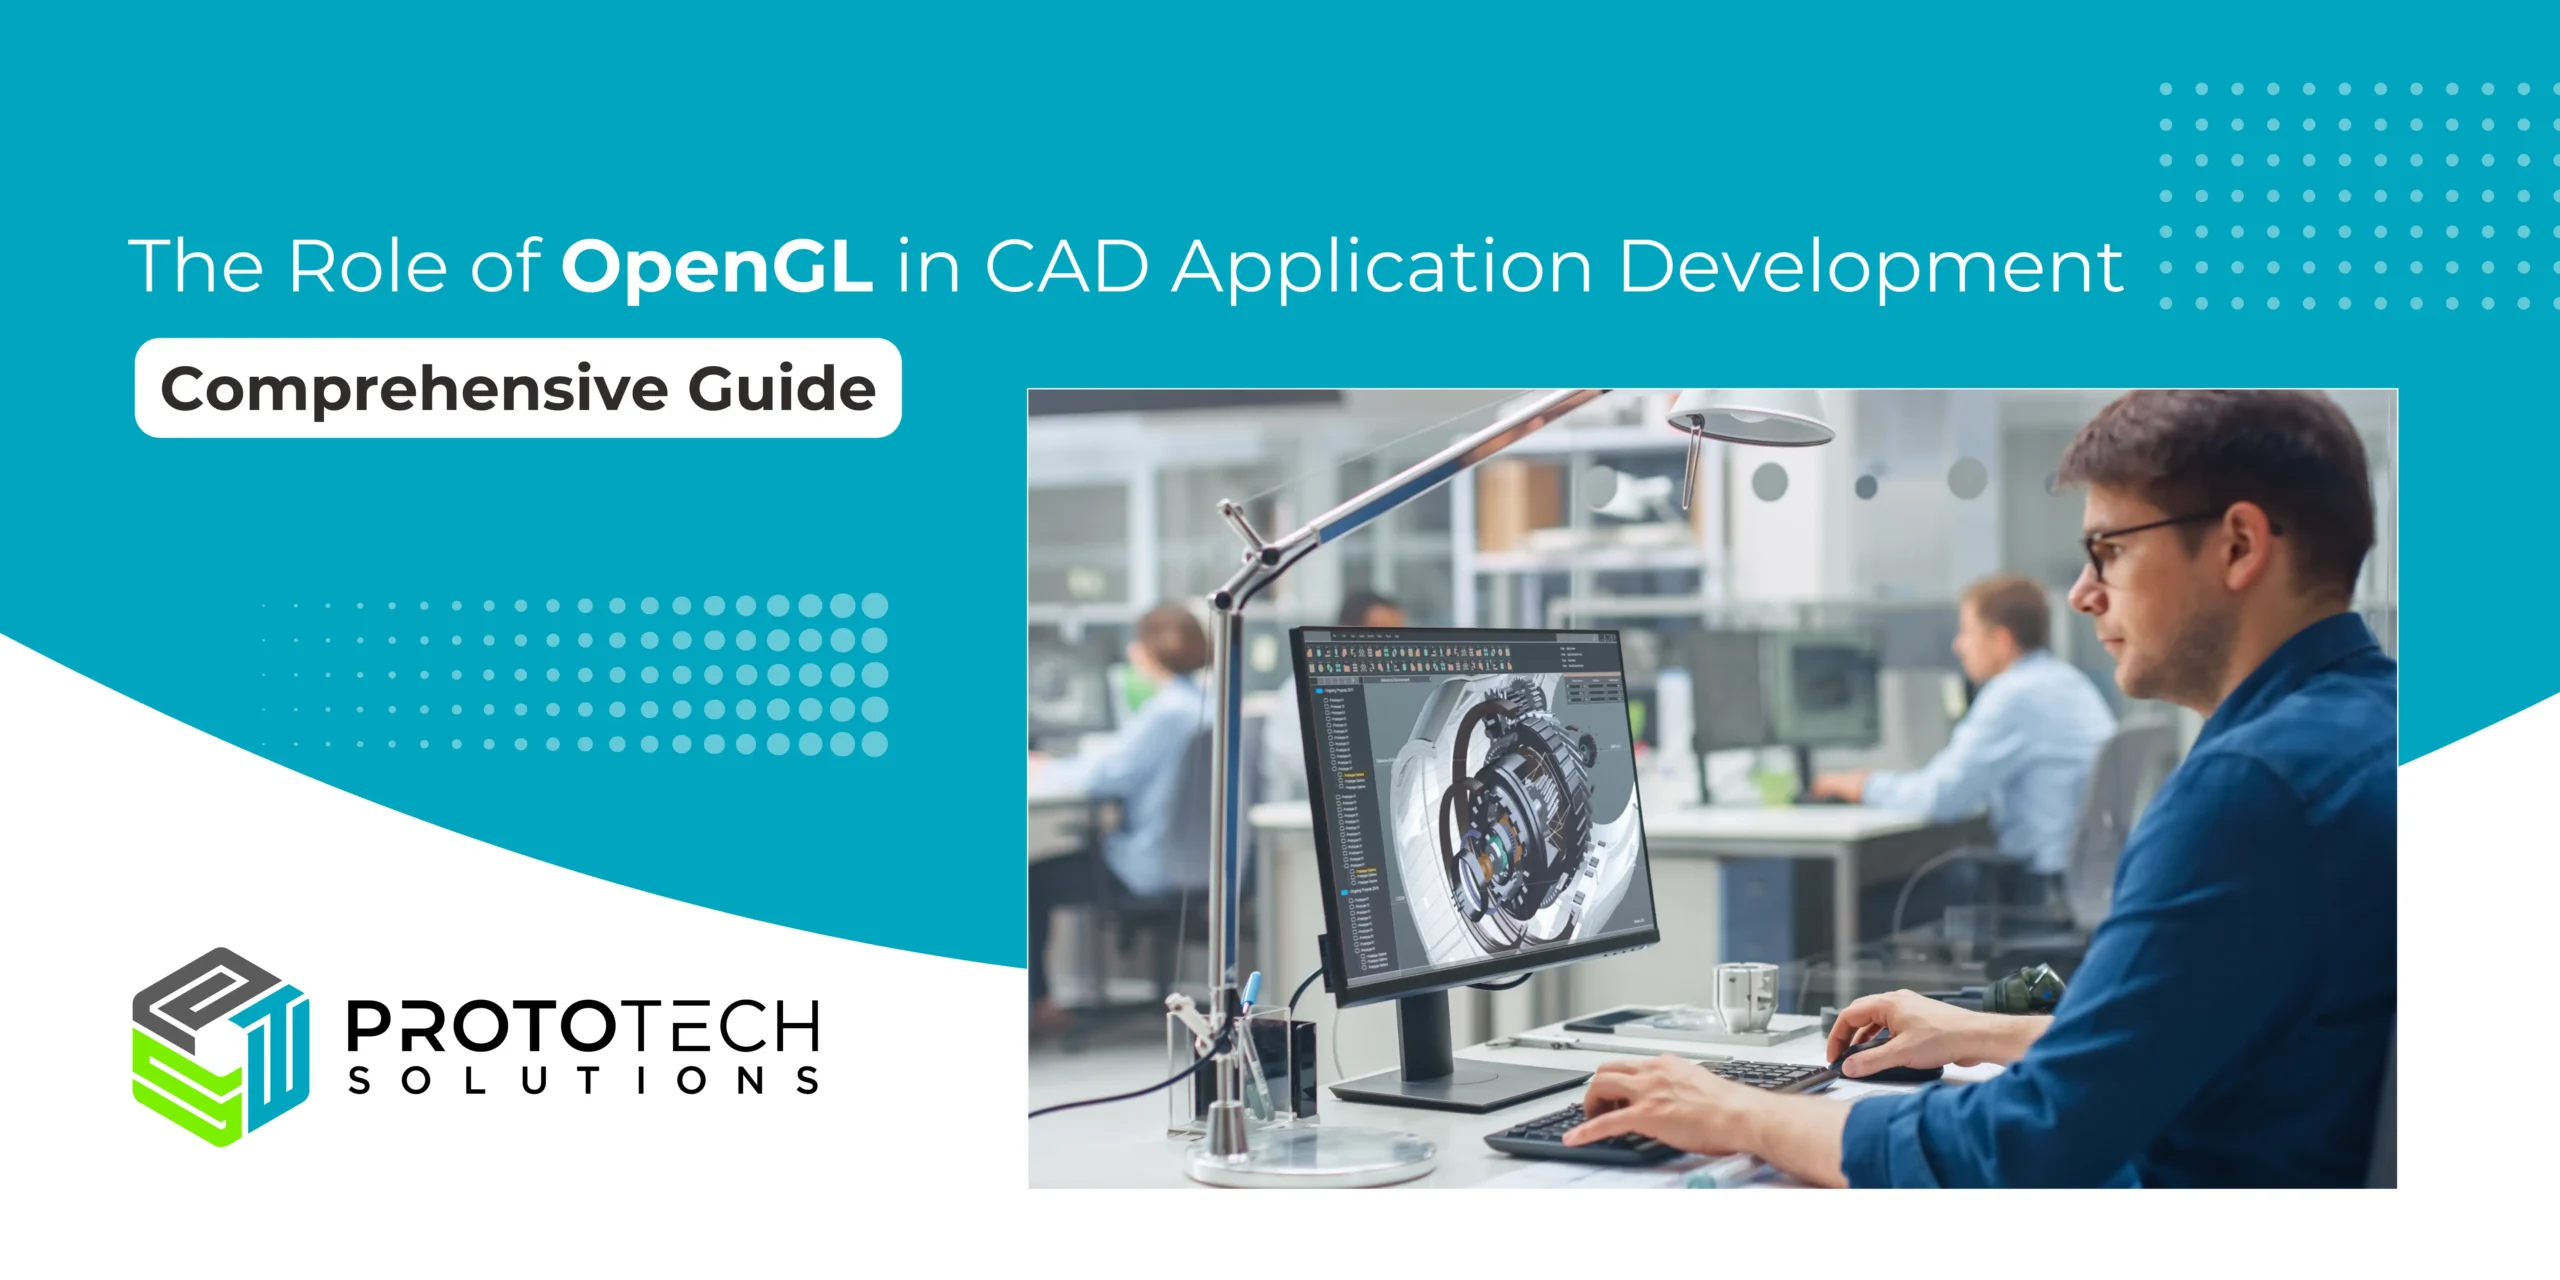 The Role of OpenGL in CAD Application Development